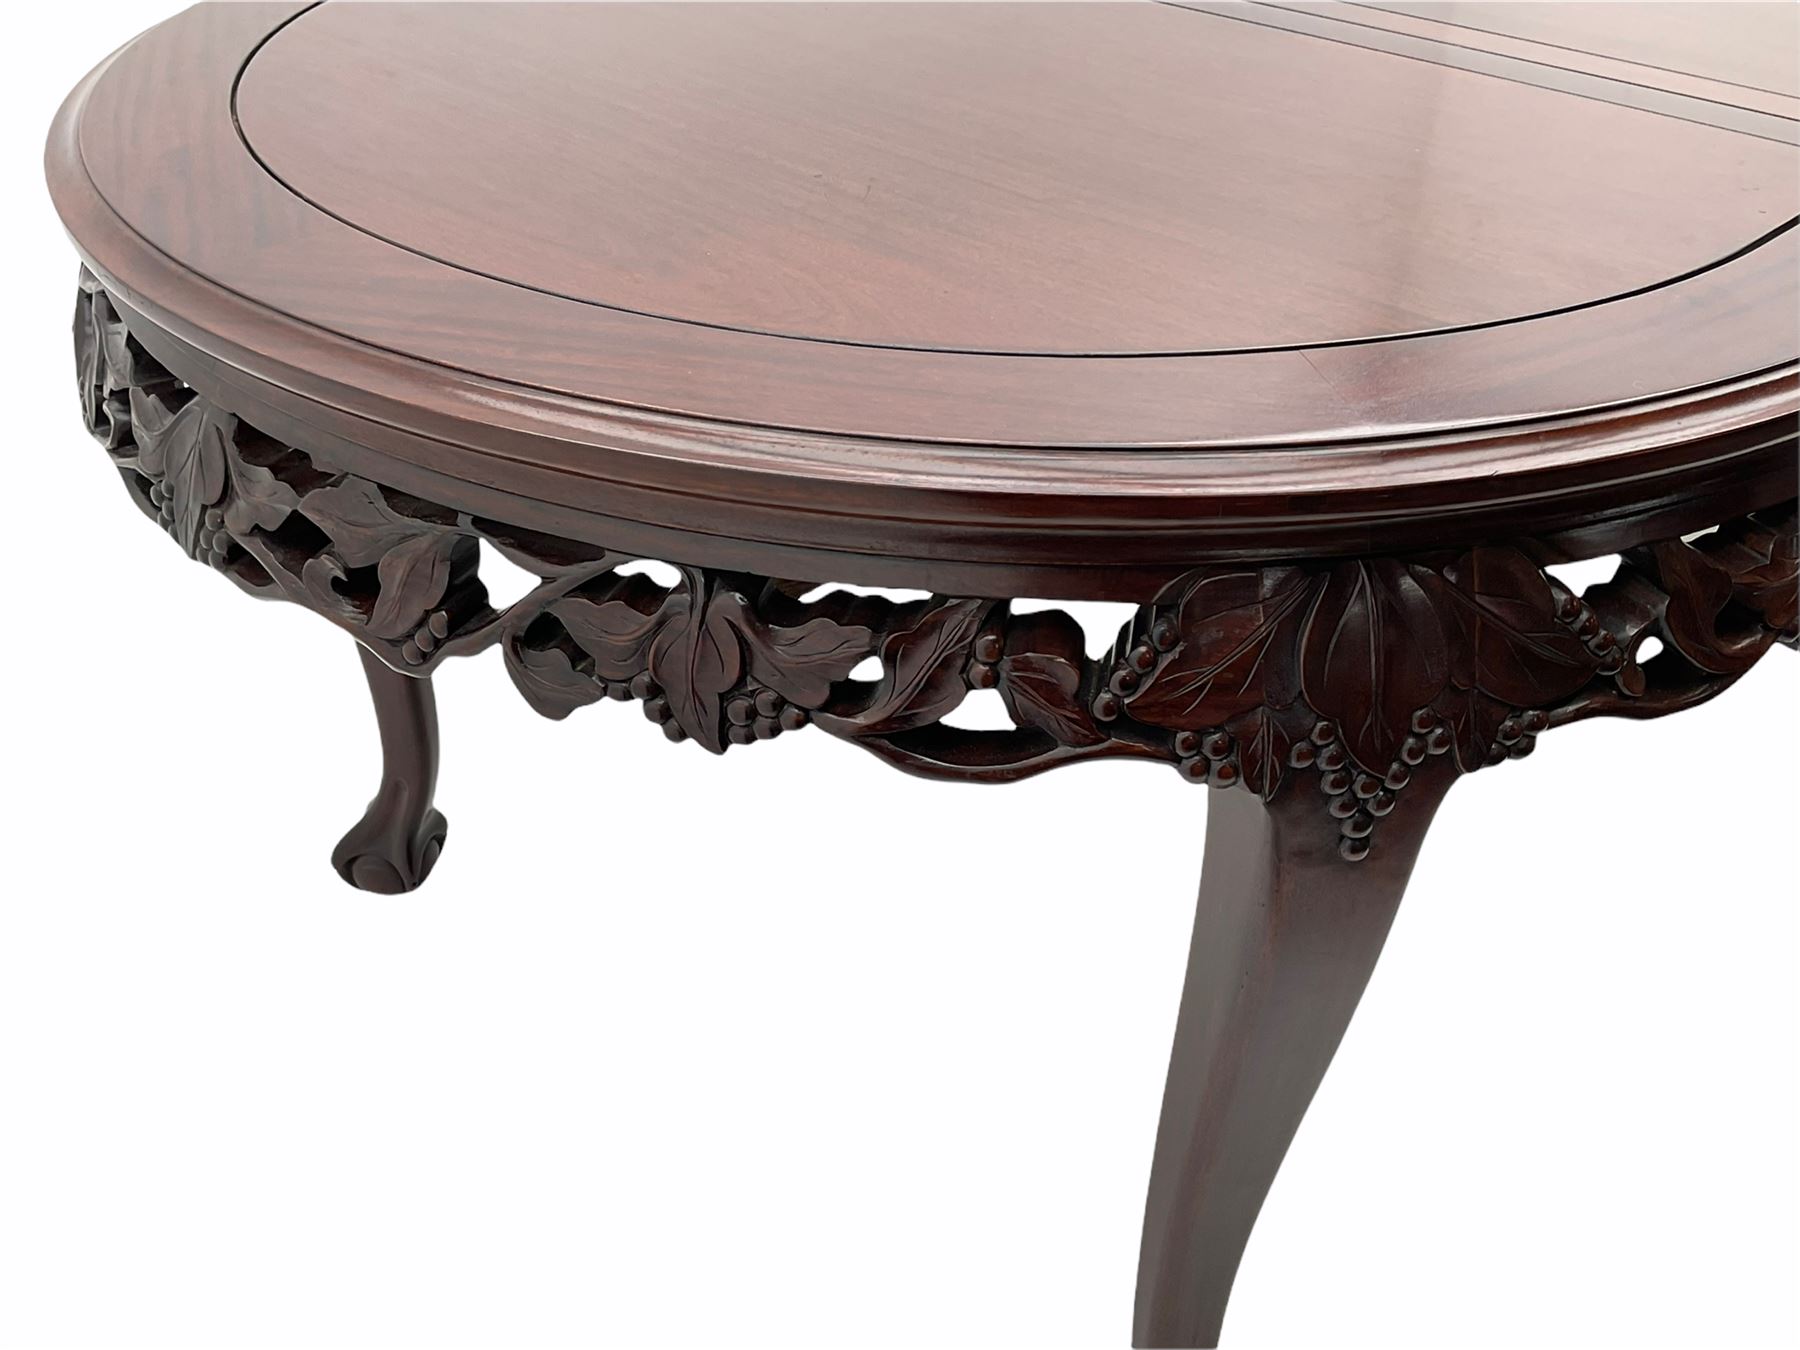 Late 20th century Chinese carved solid hardwood oval extending dining table - Image 8 of 11